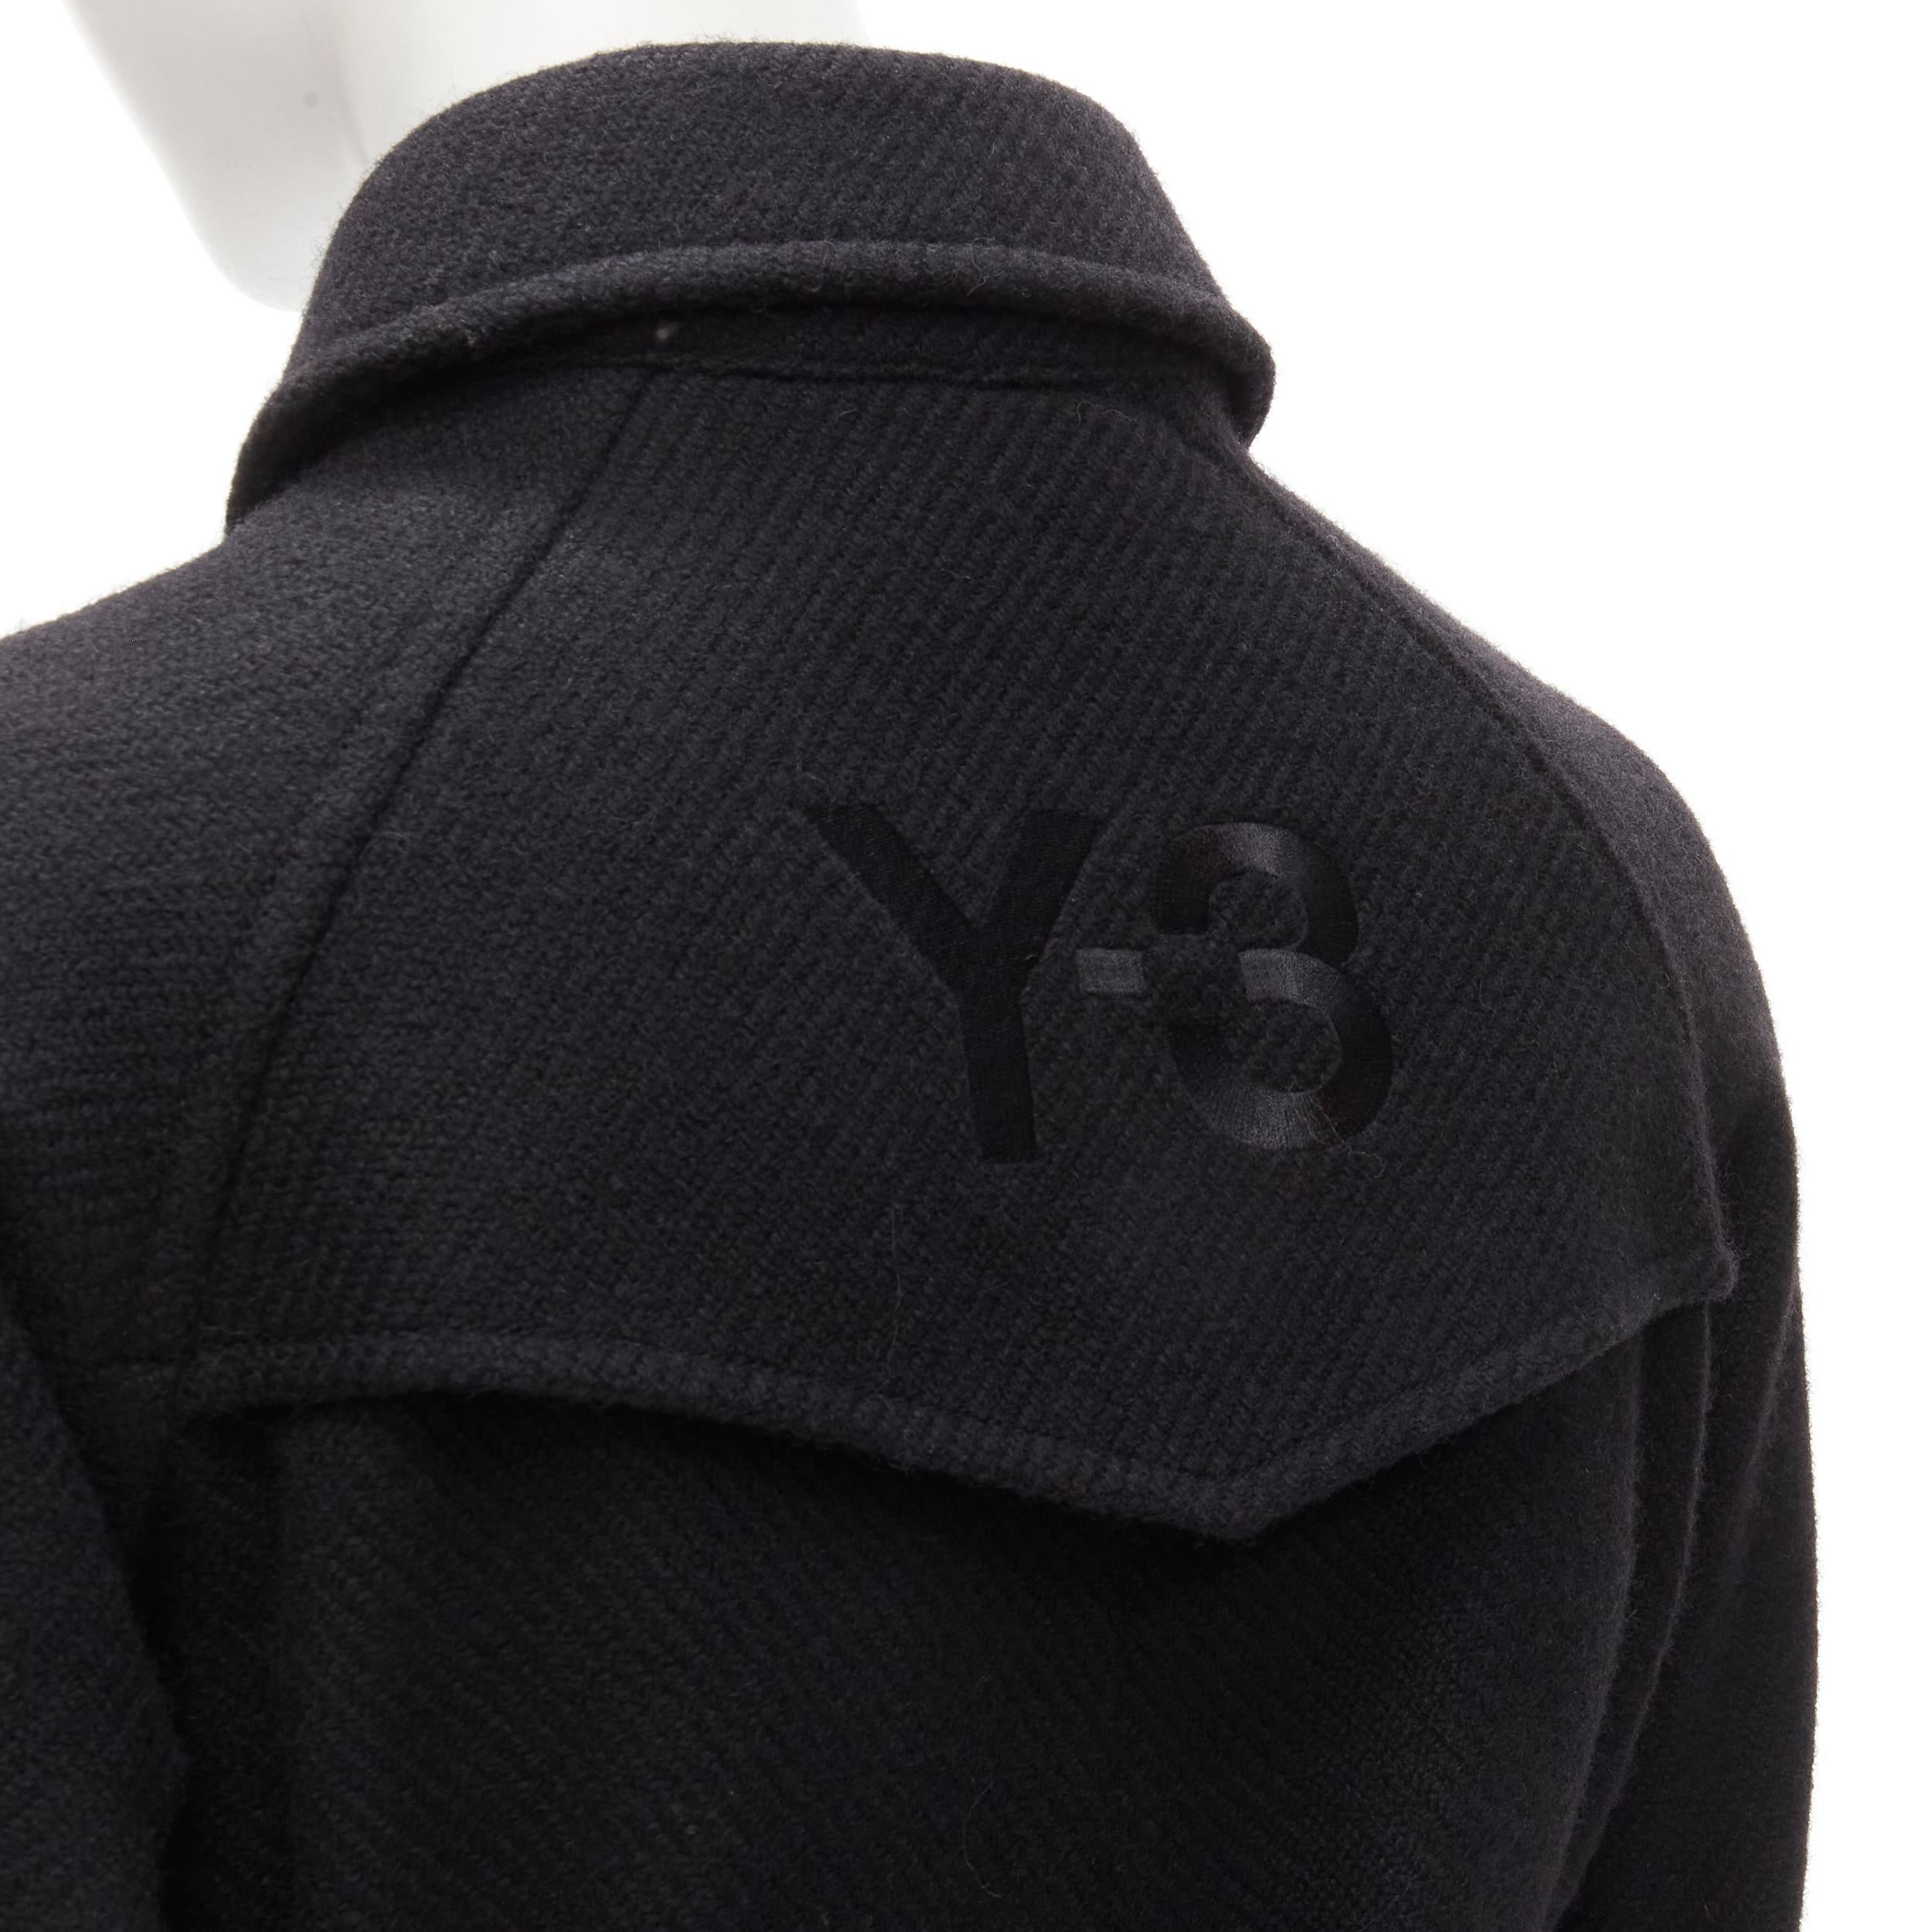 Y3 YOHJI YAMAMOTO ADIDAS black wool double breasted flared capelet trench XS
Brand: Y3
Material: Feels like wool
Color: Black
Pattern: Solid
Closure: Button
Extra Detail: Double breasted front closure. Y3 logo embroidery at back. Leather belted